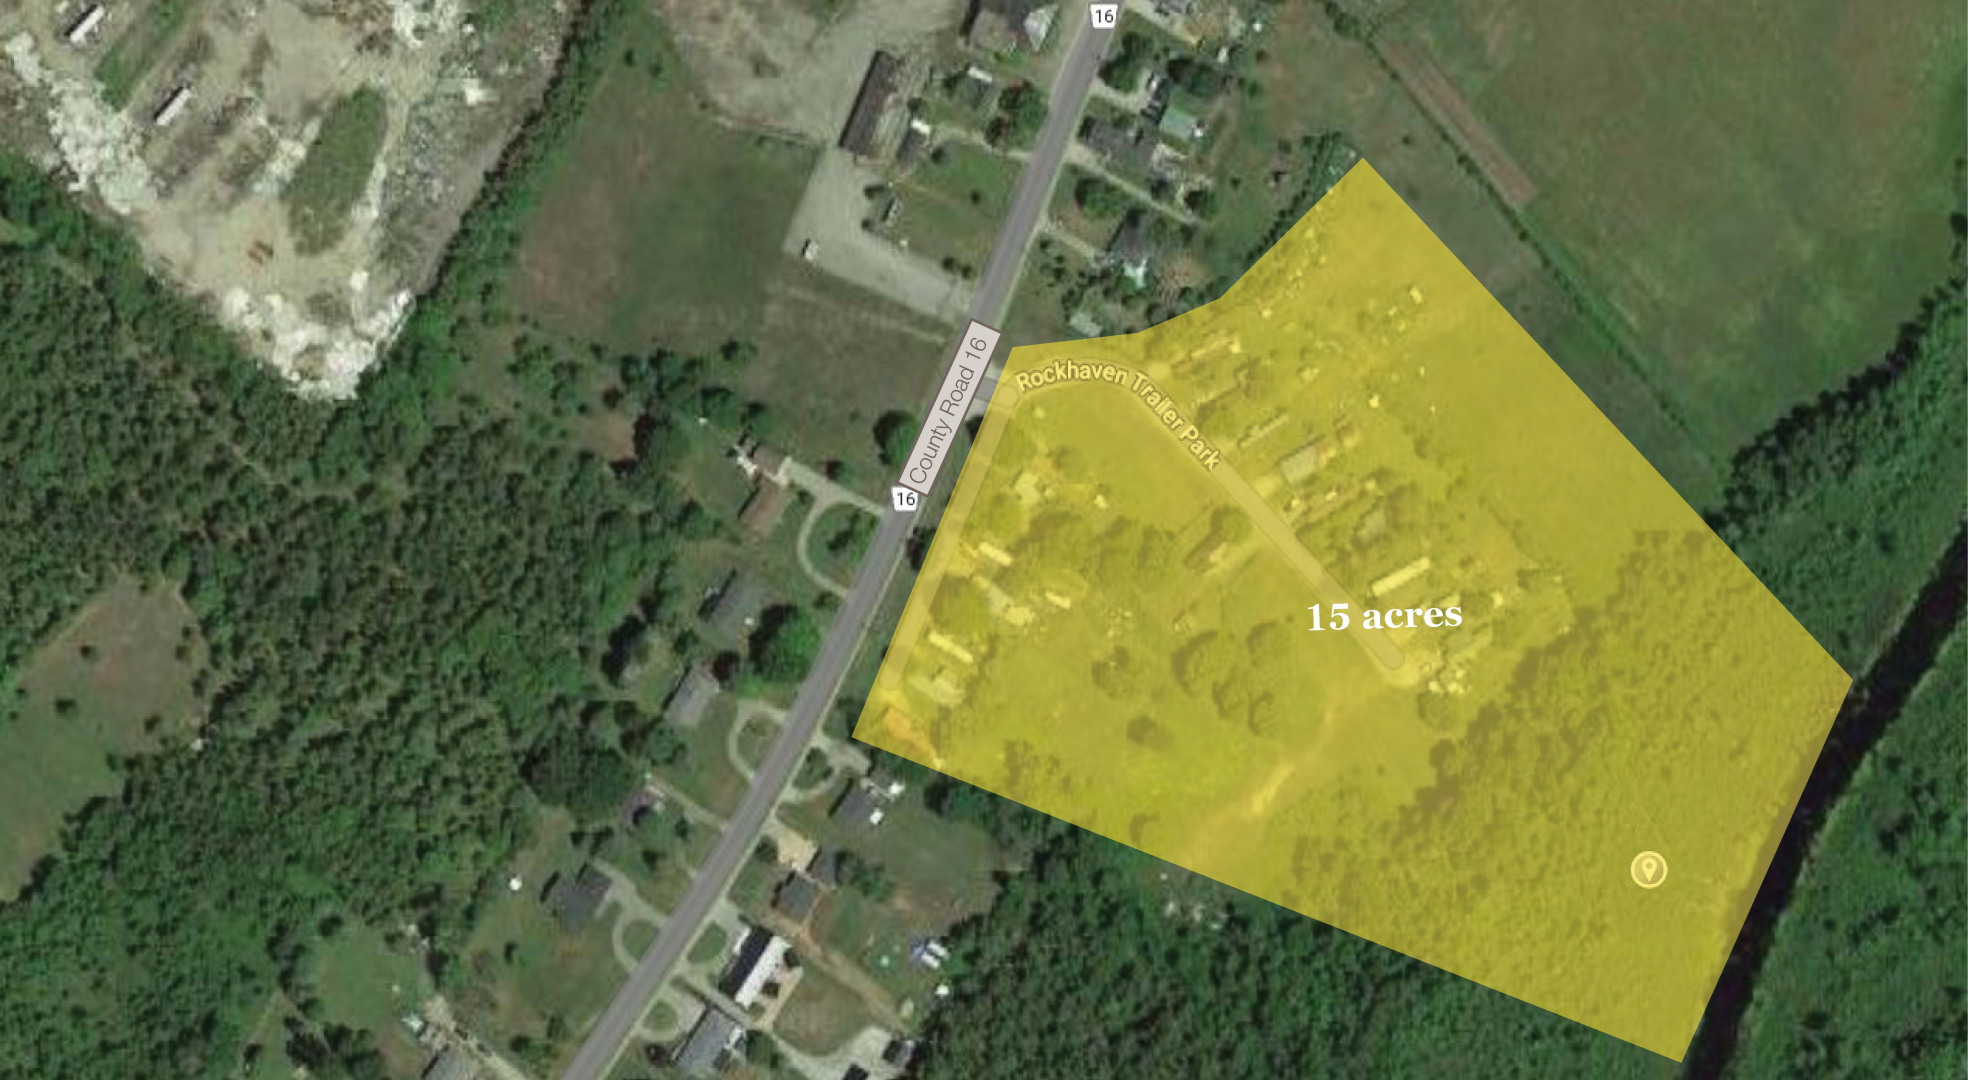 323 County Road 16 Aerial View with Property Highlighted